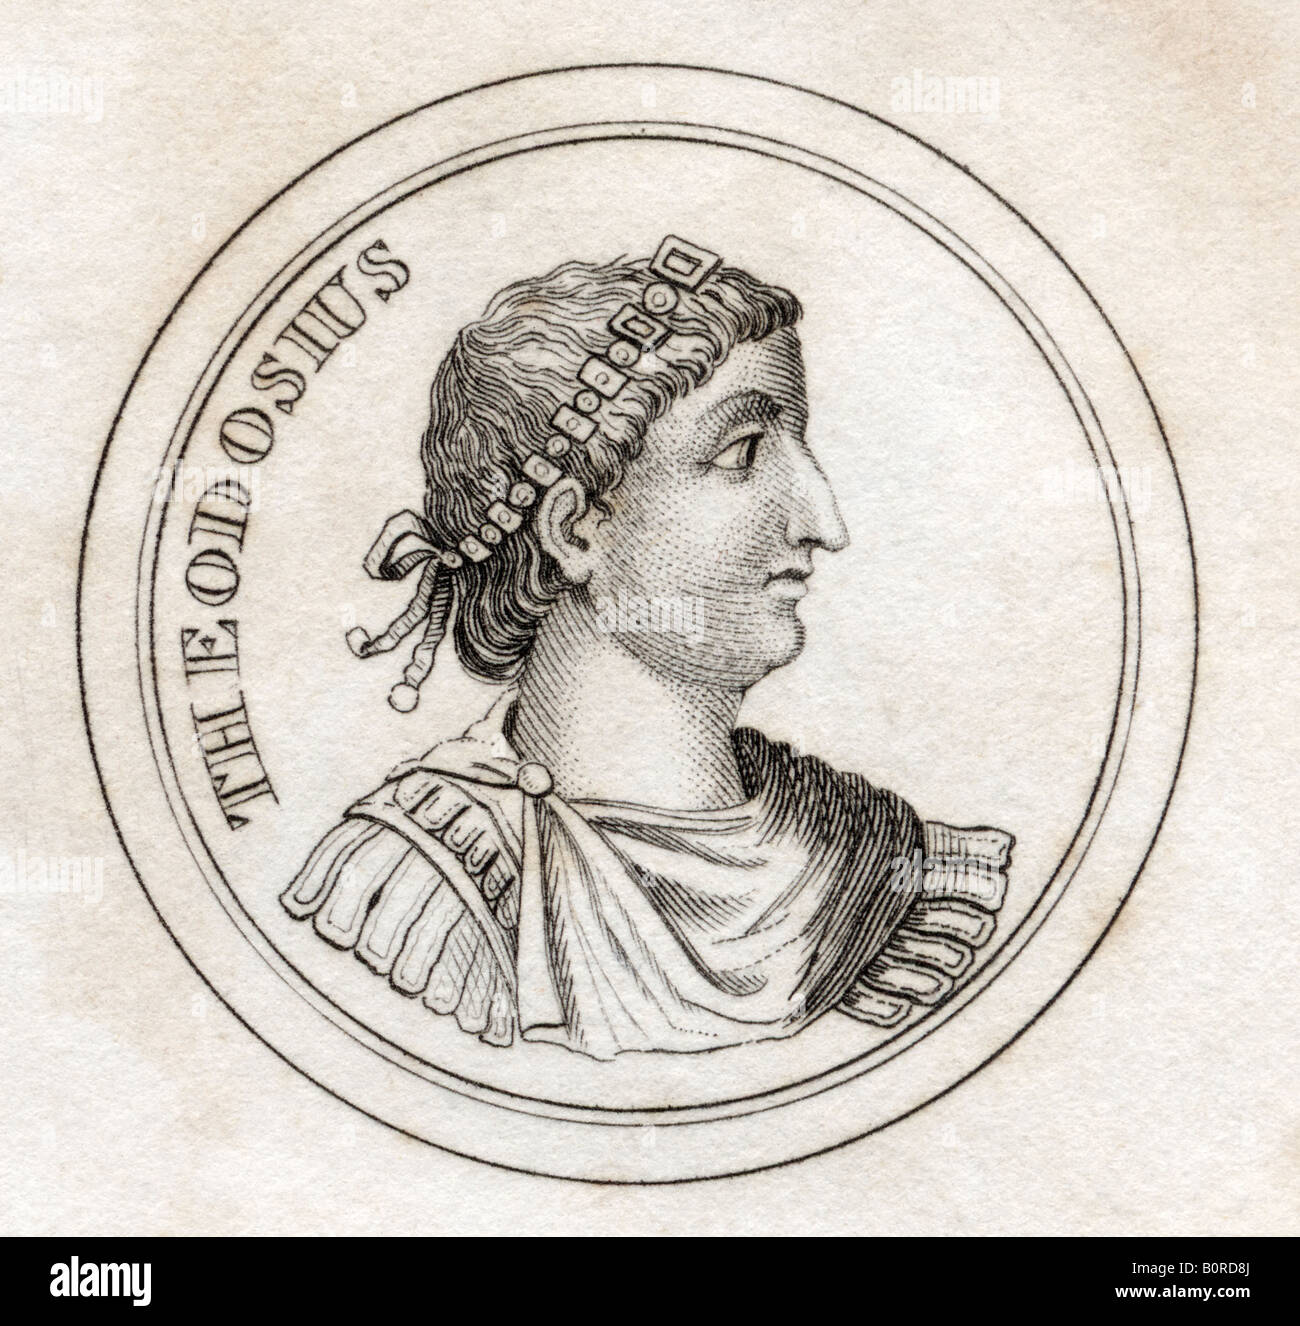 Theodosius the Great, Flavius Theodosius, AD 347 - 395.  Roman Emperor.  From the book Crabbs Historical Dictionary, published 1825. Stock Photo